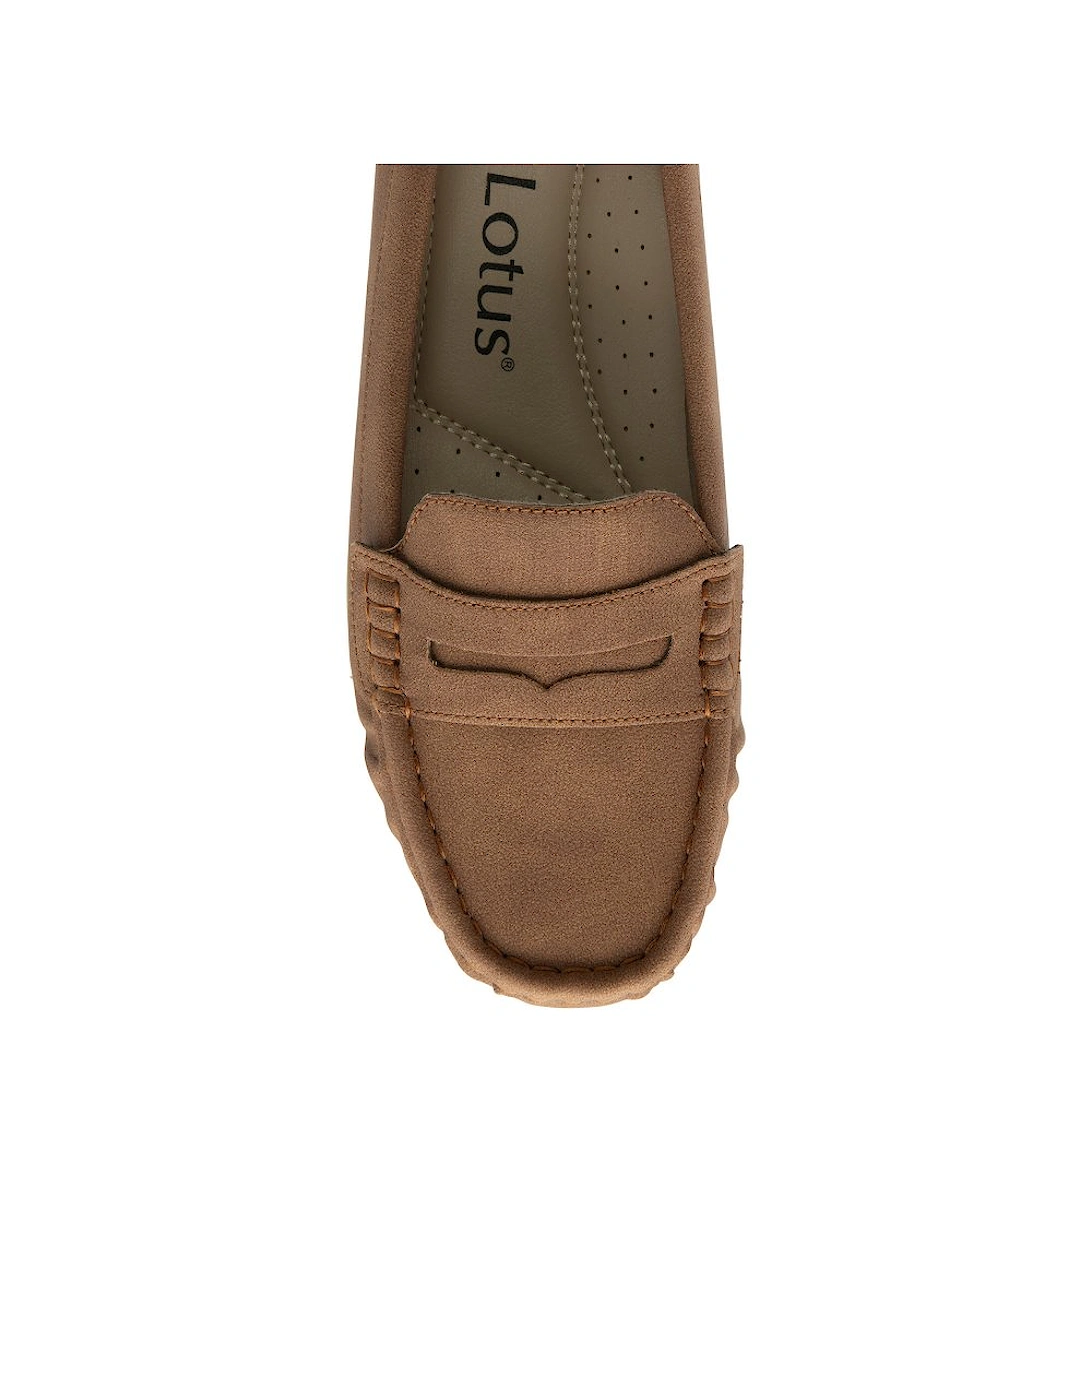 Durante Womens Loafers